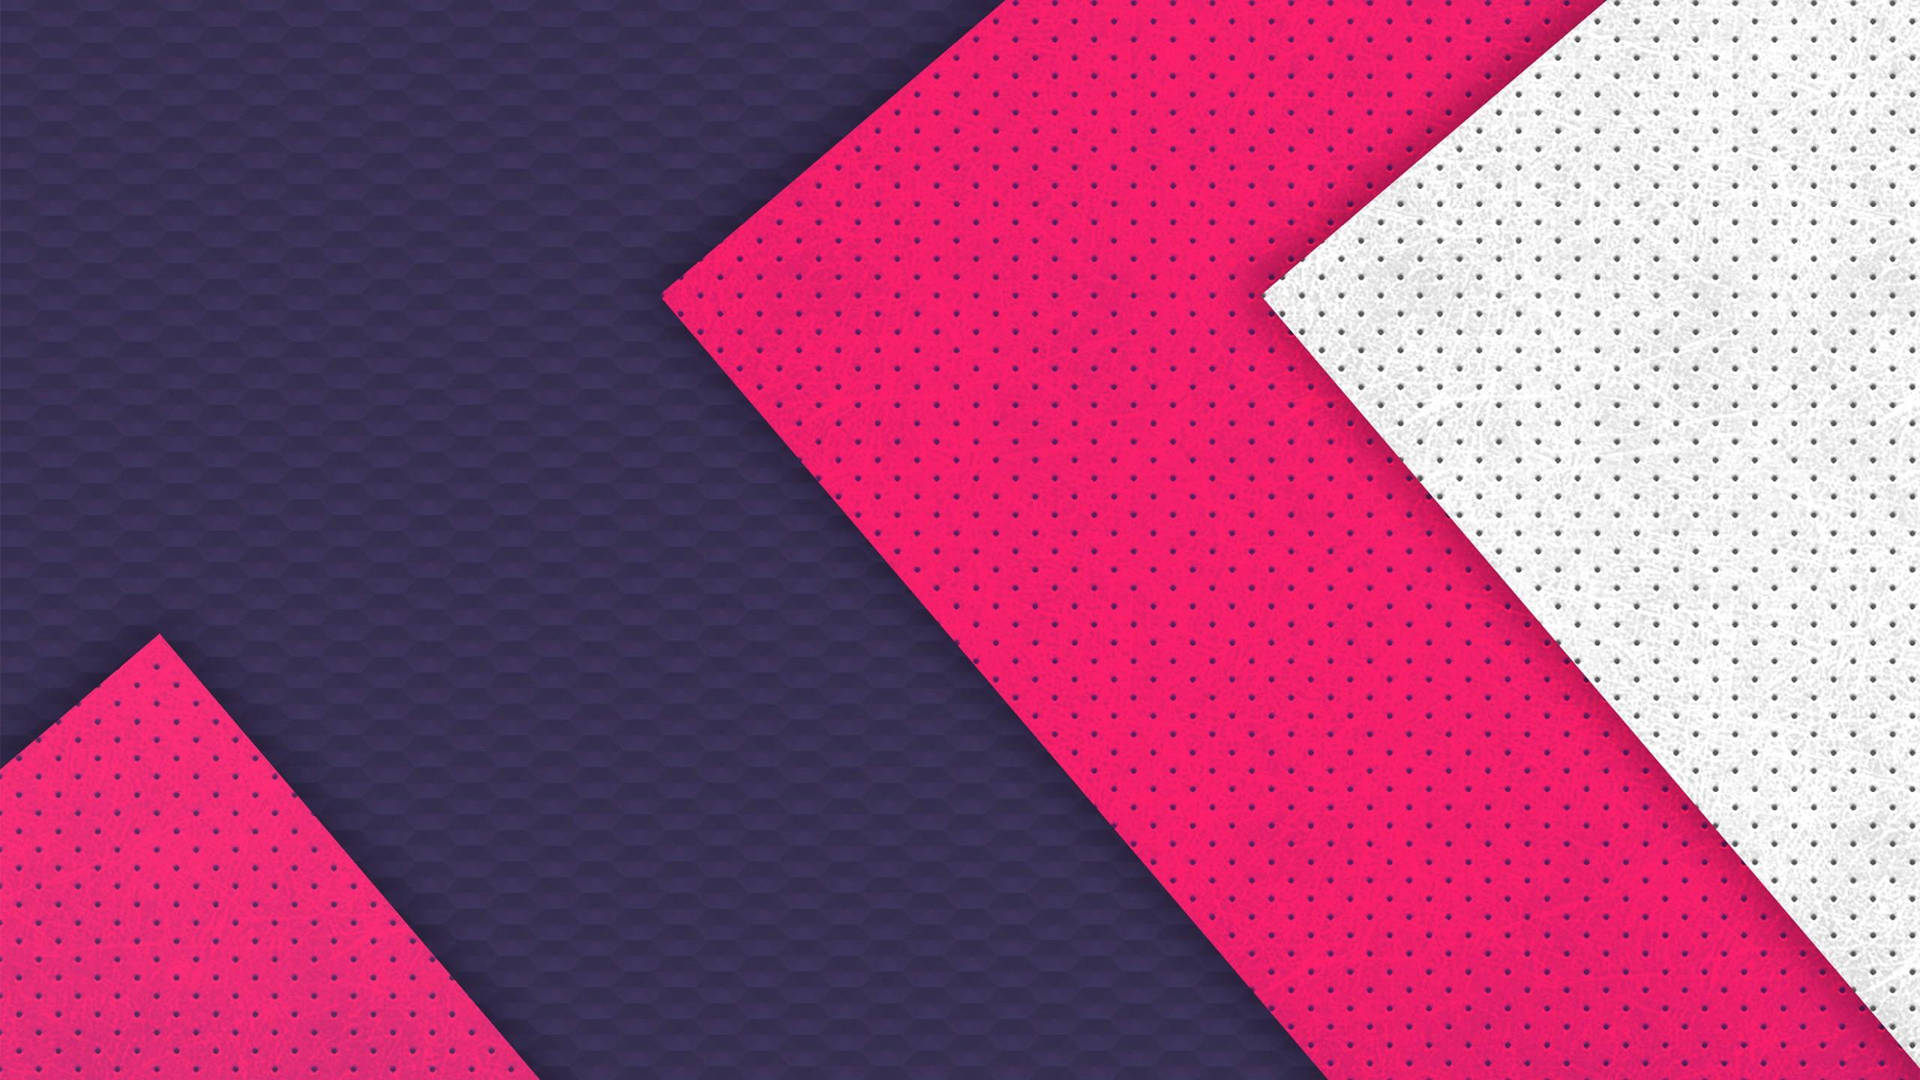 Layers Of Pink And White Triangles Wallpaper